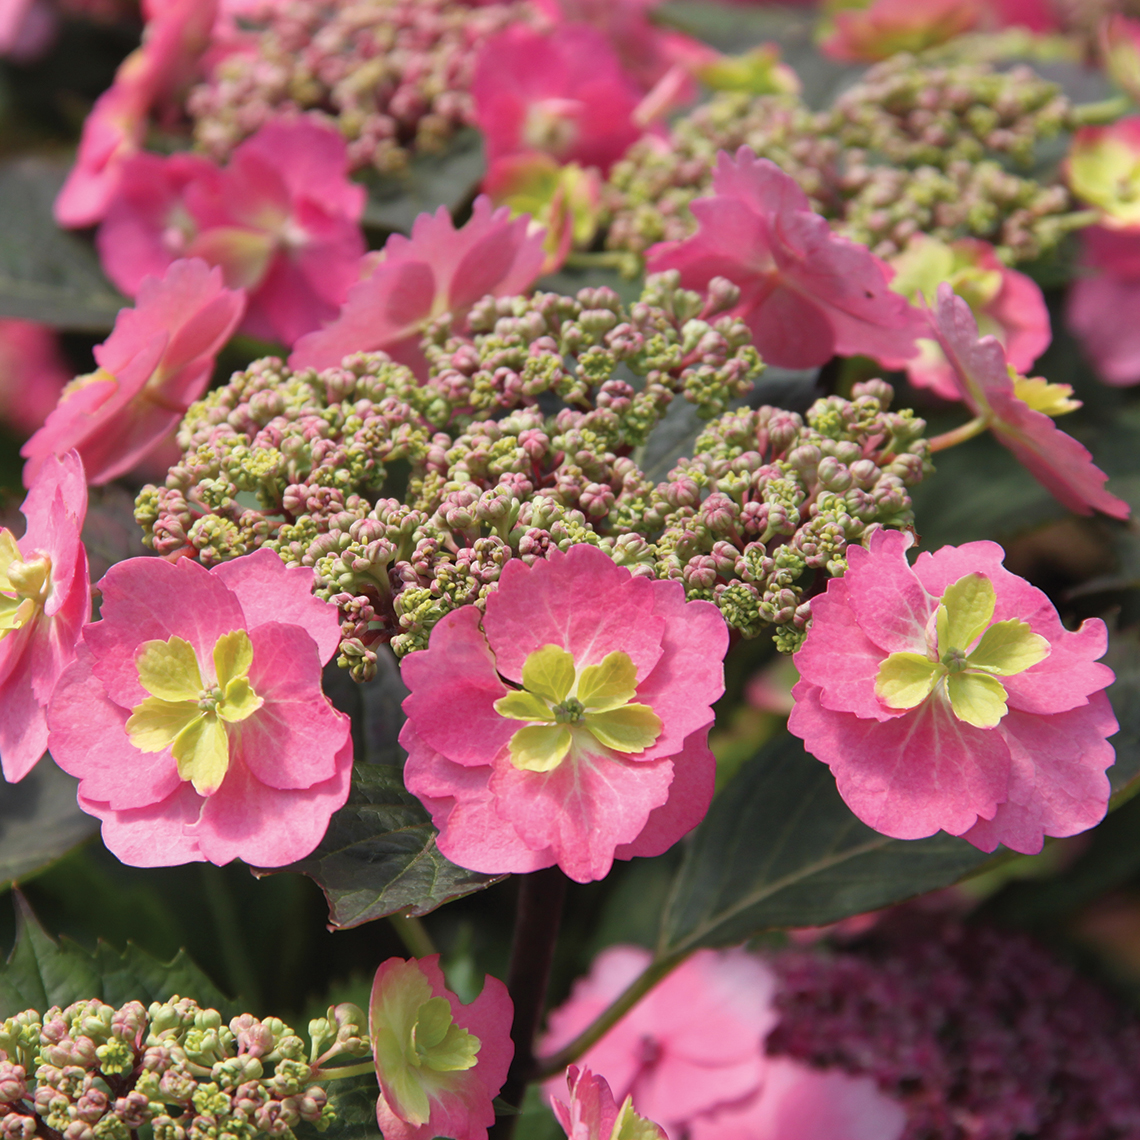 Closeup of the flowers of Tuff Stuff mountain hydrangea showing the pink color variant